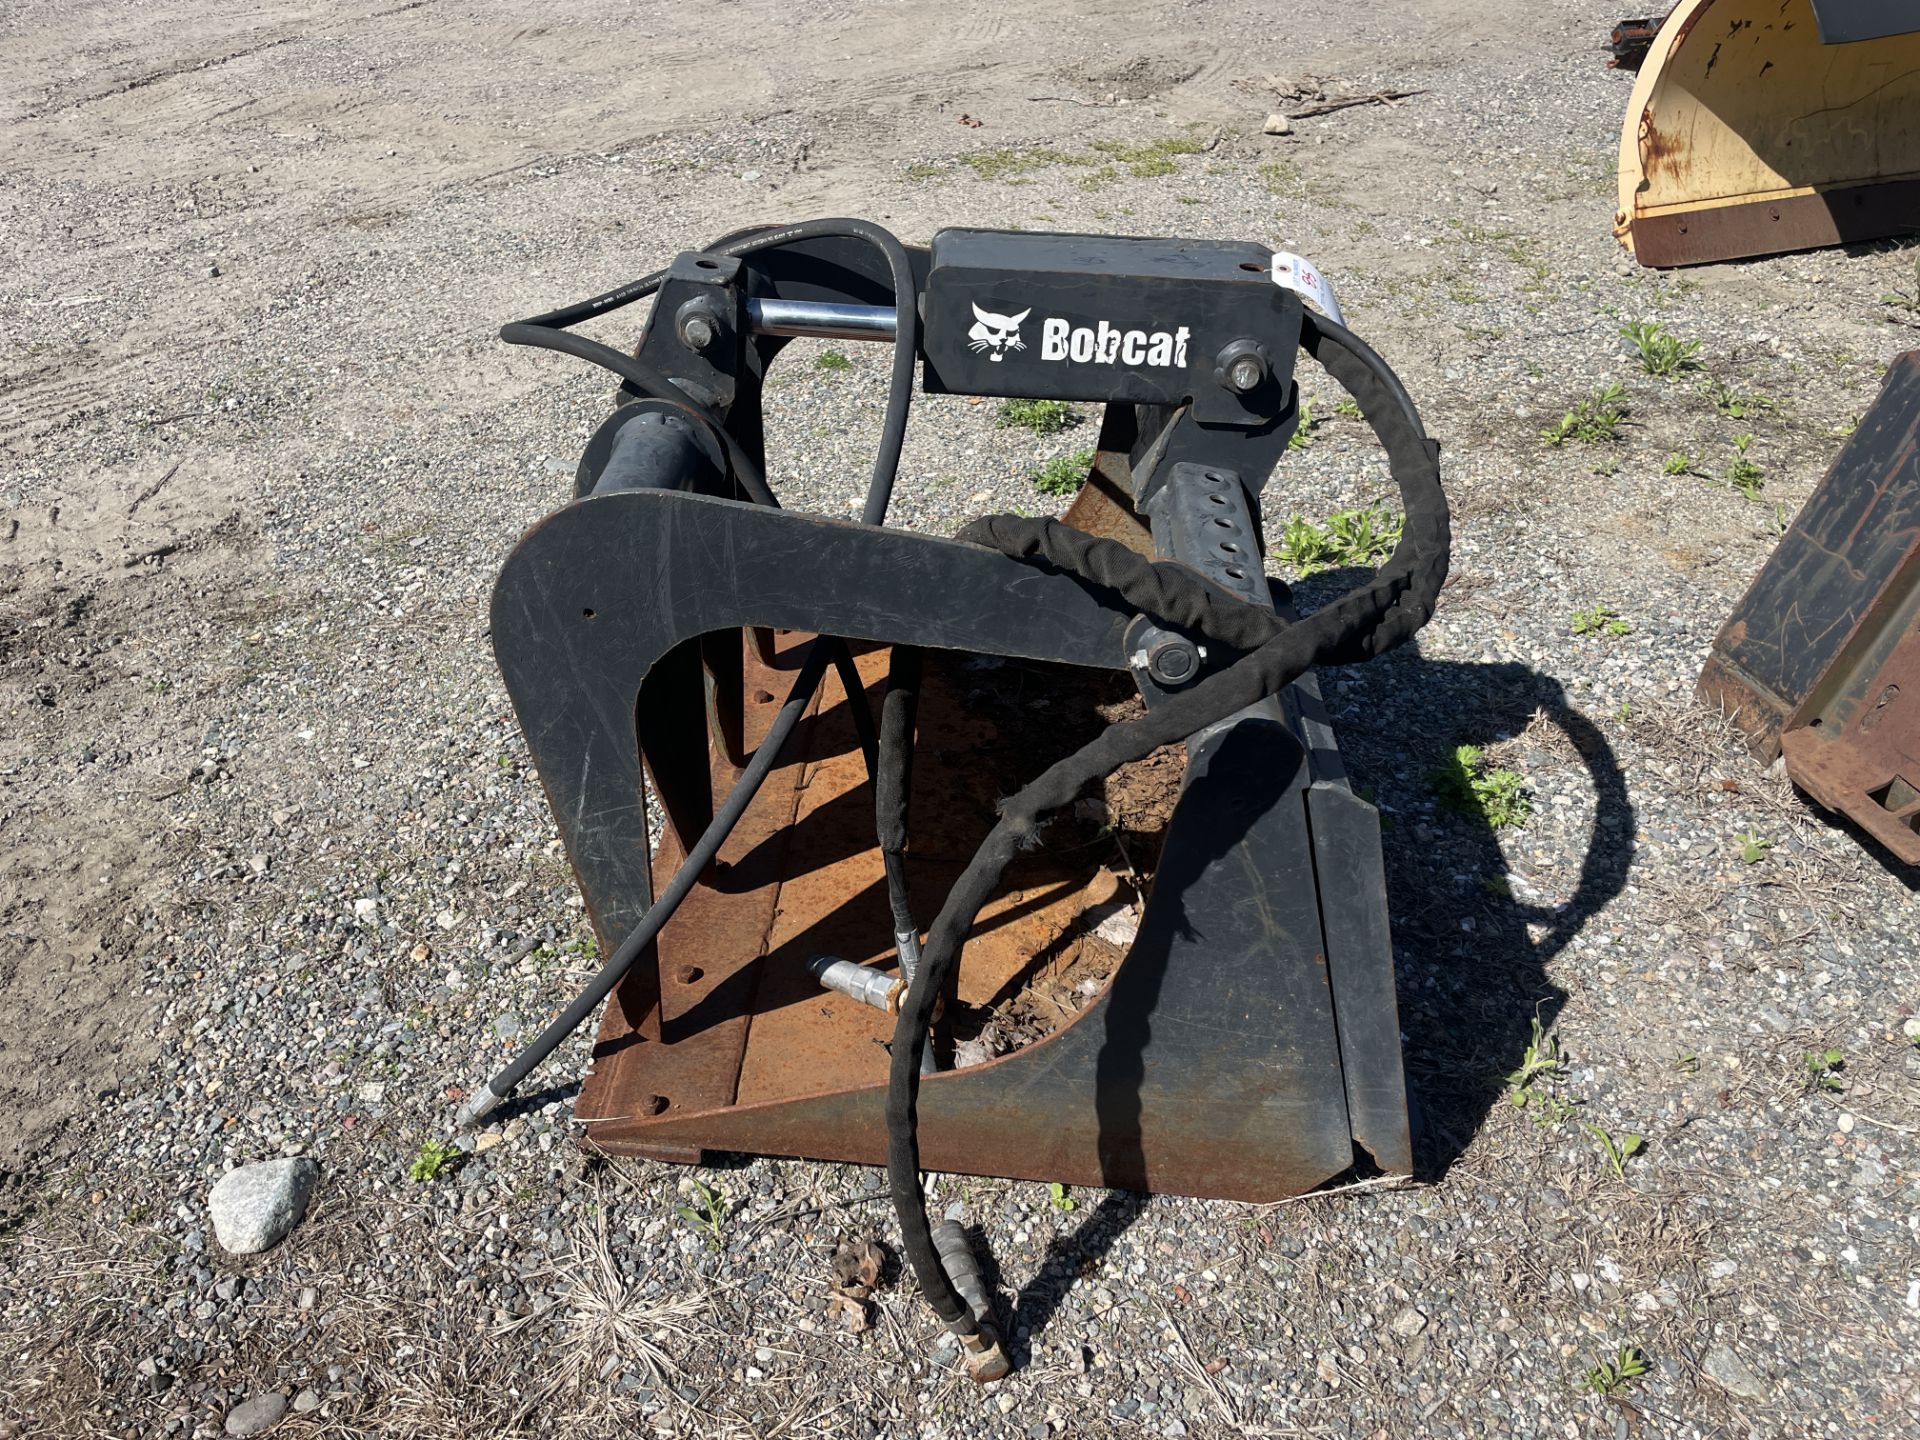 2018 Bobcat 36" Industrial Grapple Bucket Attachment - Image 2 of 4